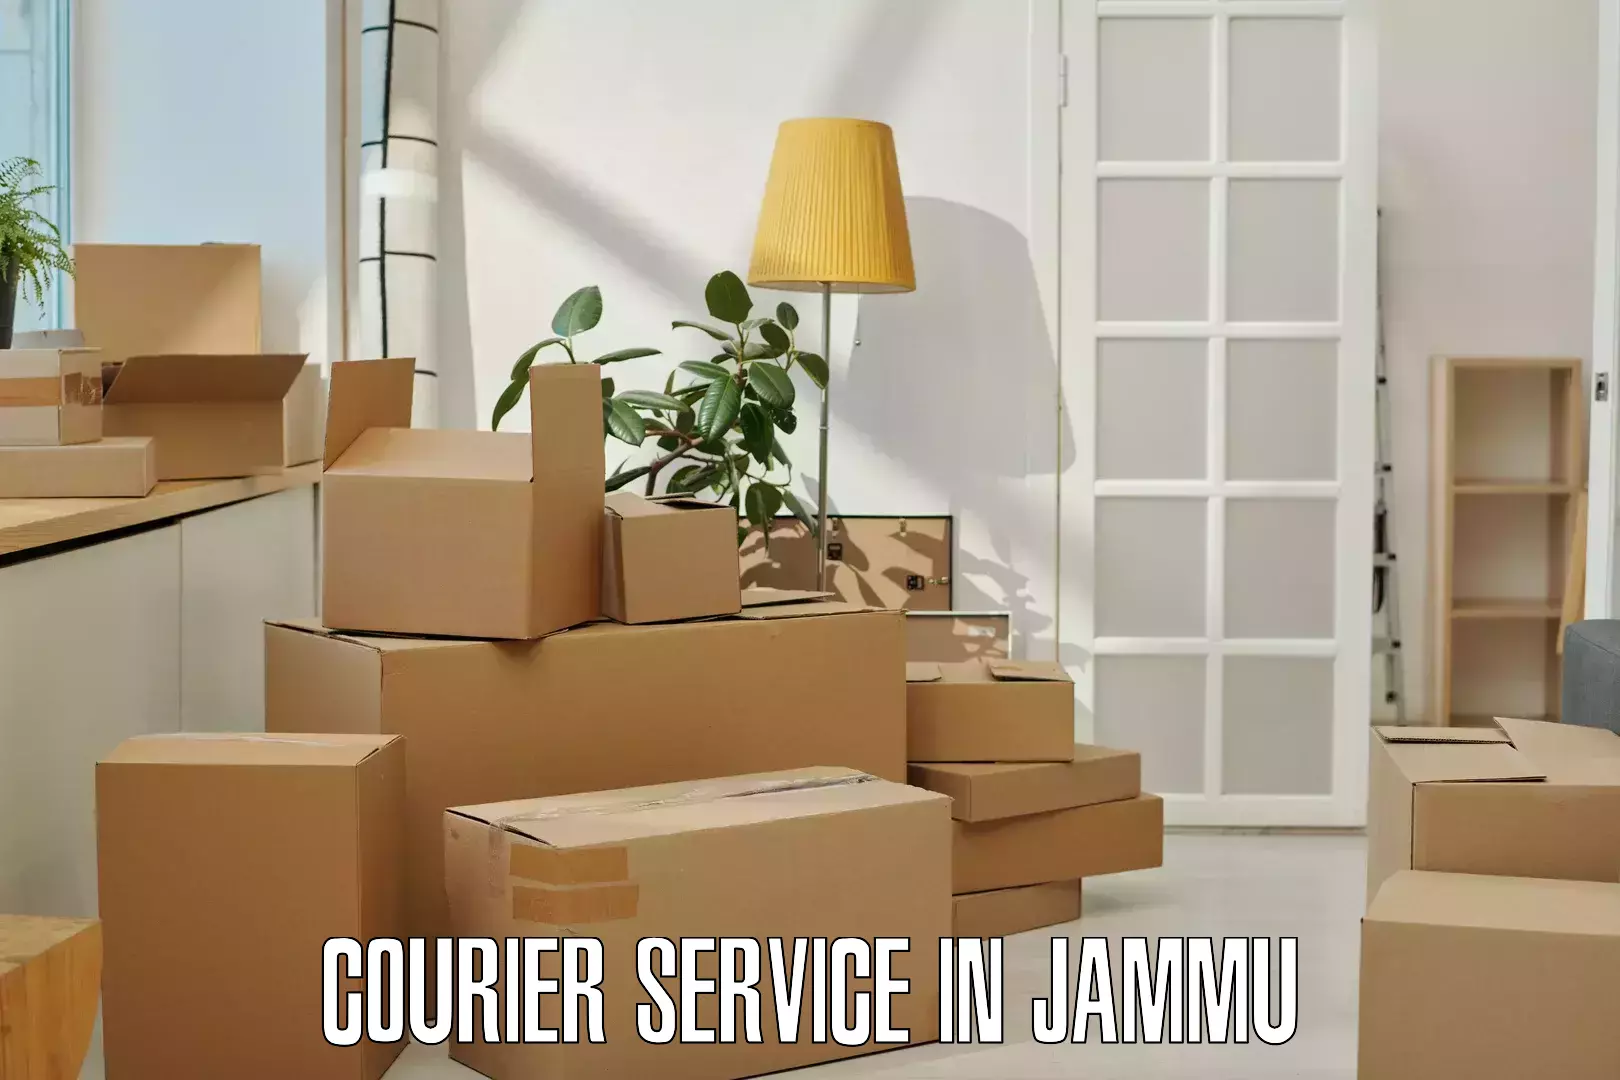 24-hour courier services in Jammu